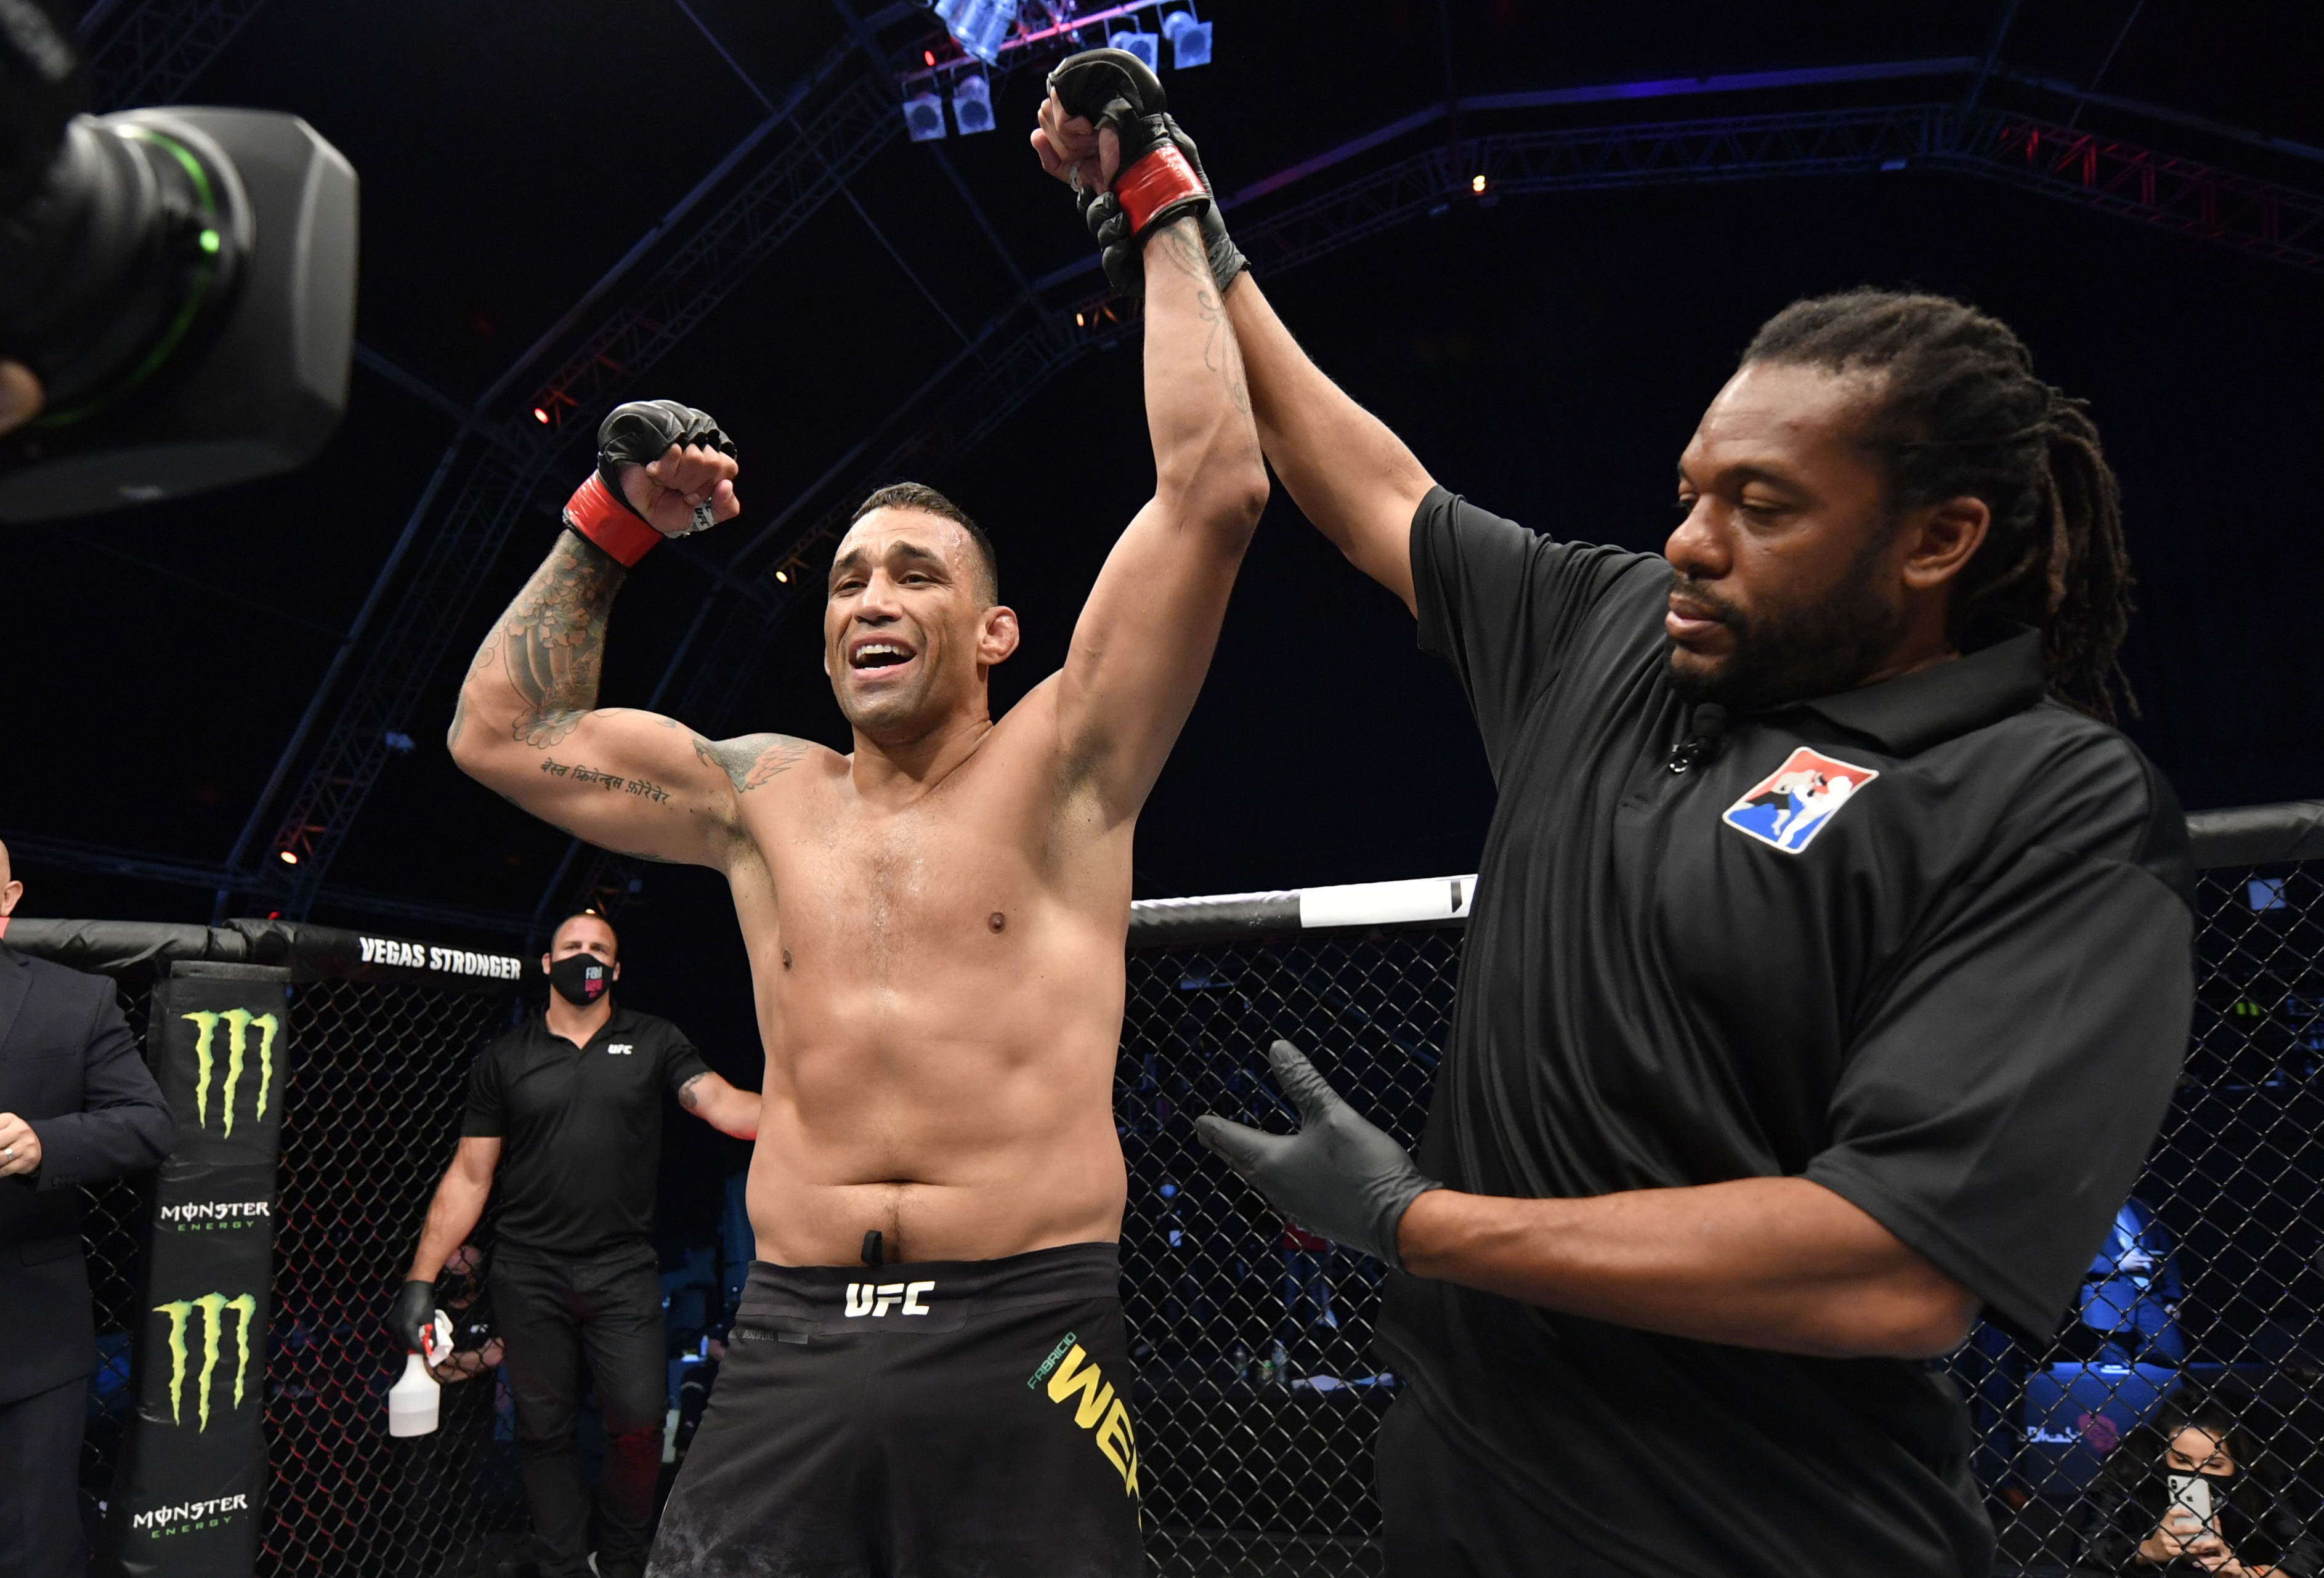 Fabricio Werdum’s fight with Renan Ferreira was ruled a No Contest.